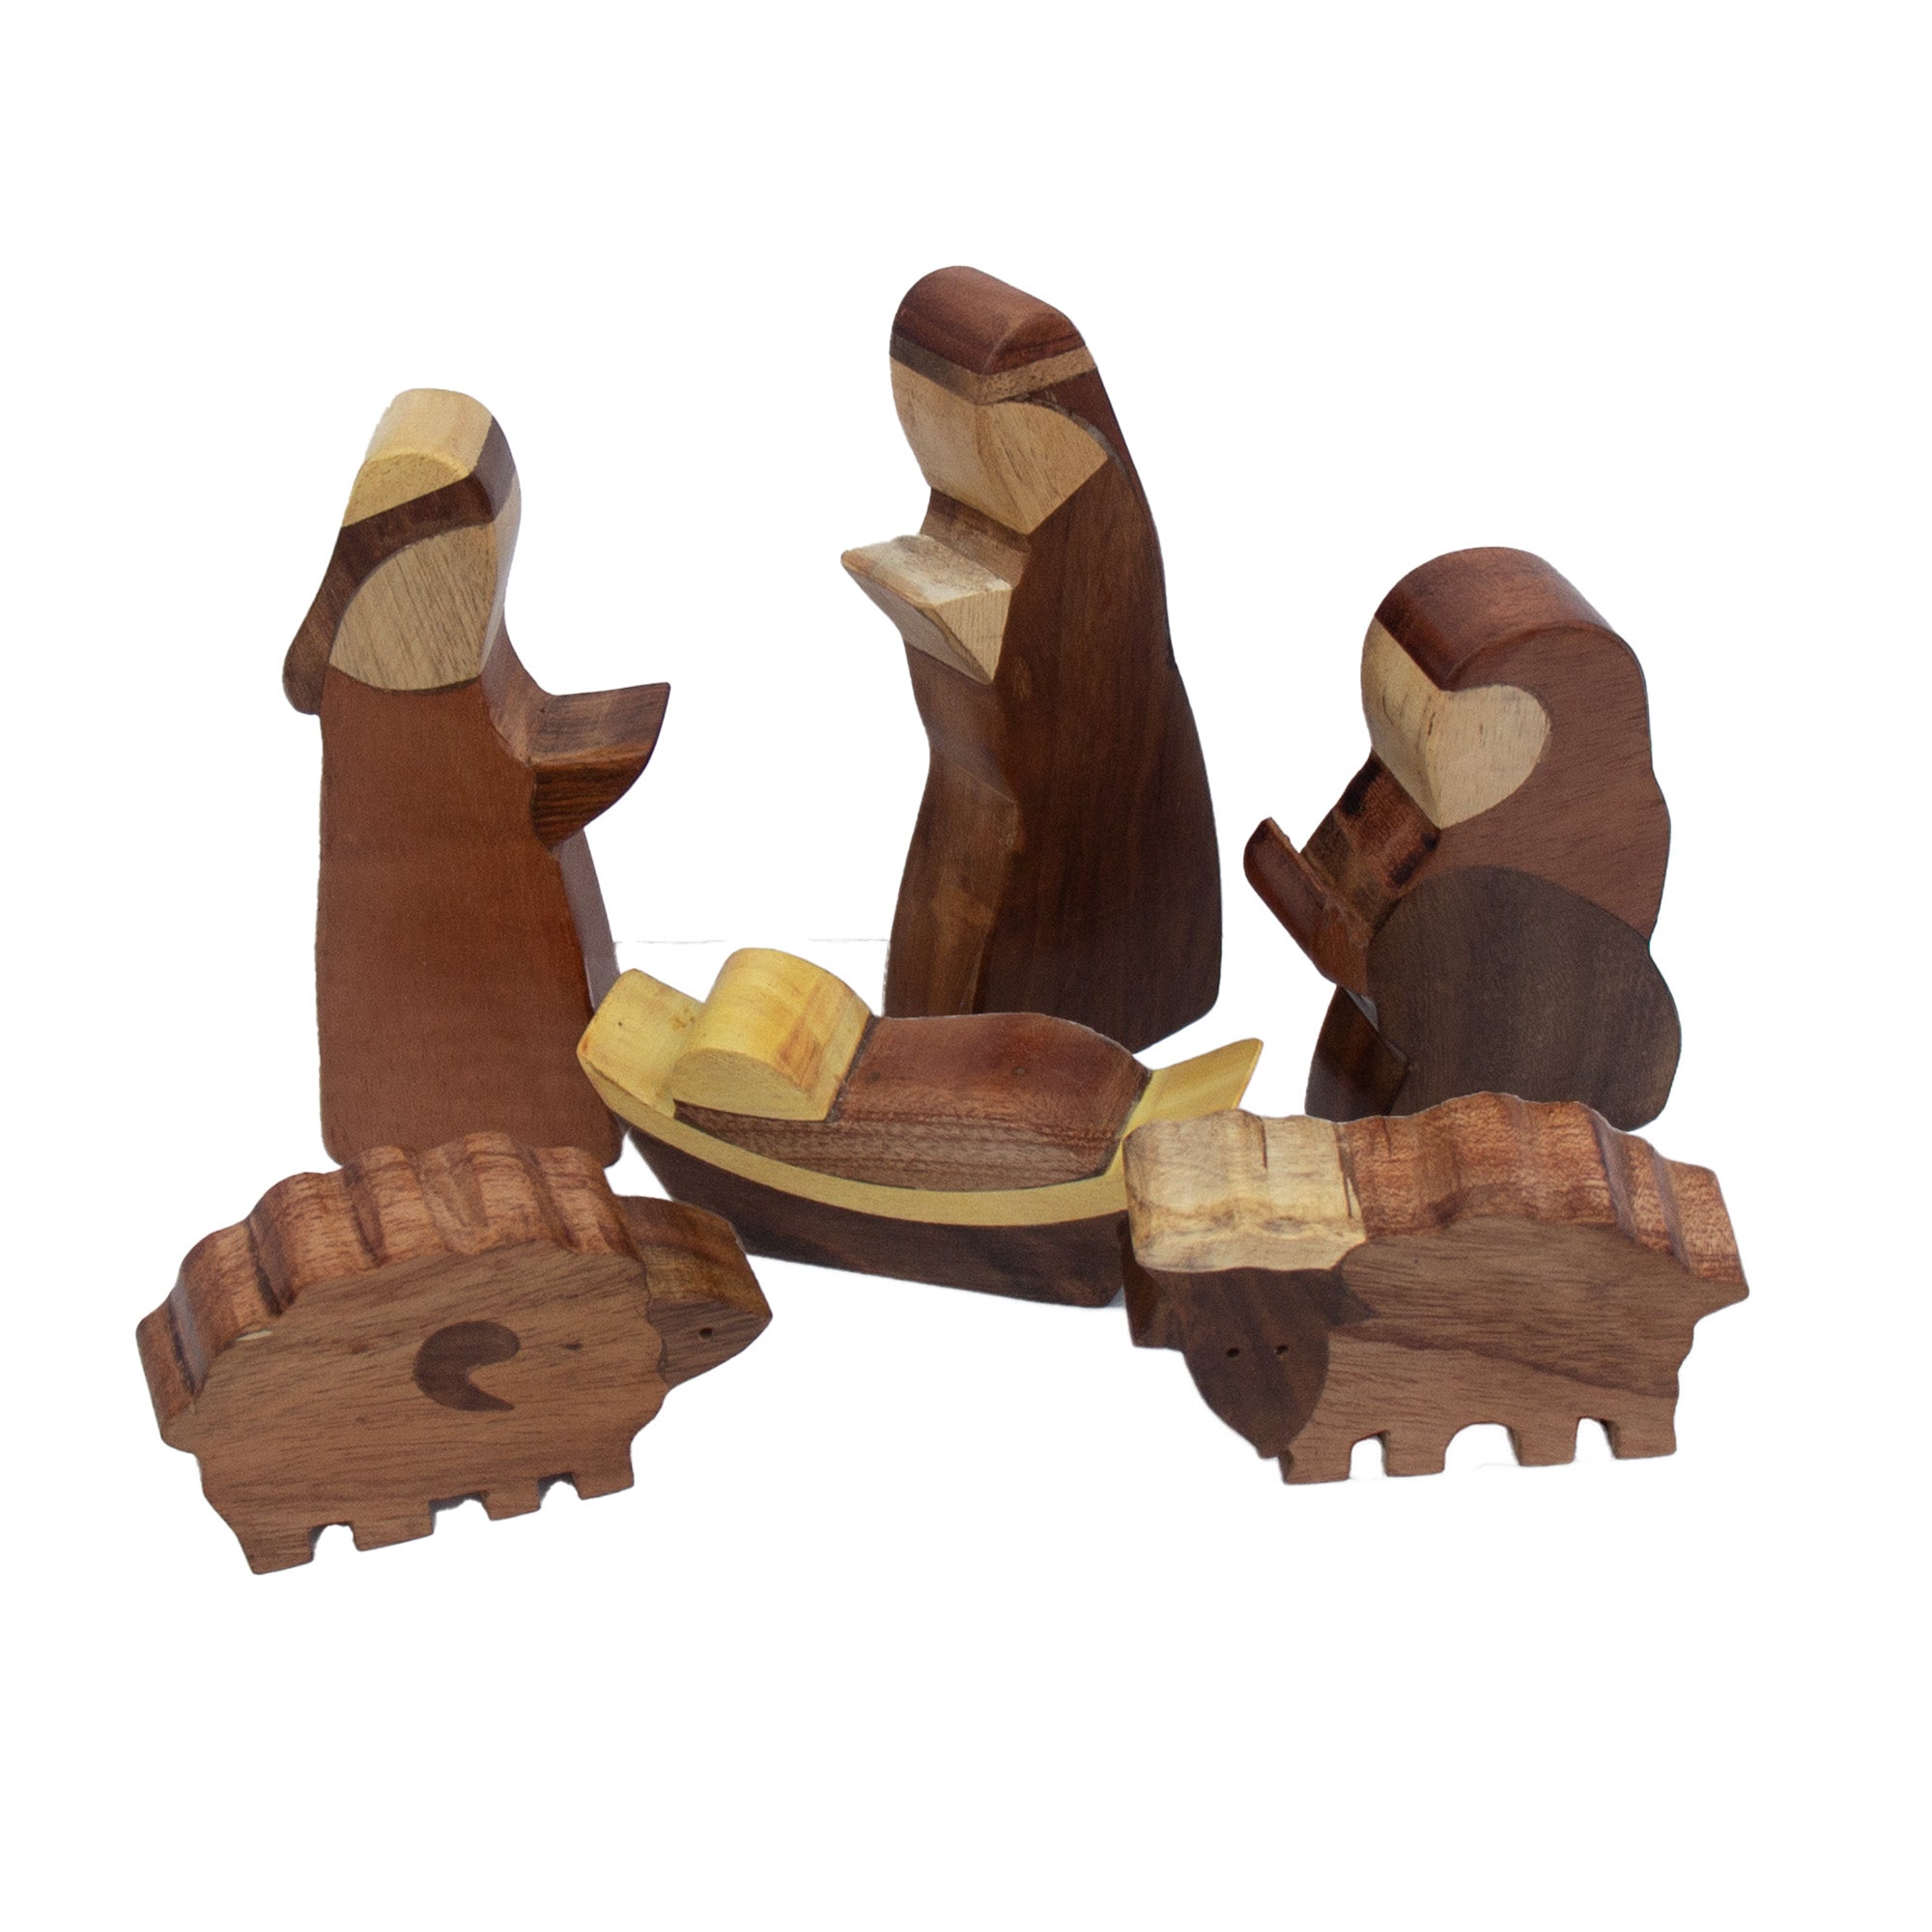 Handcrafted Joint Wood India NatIvity Set (6 pieces)